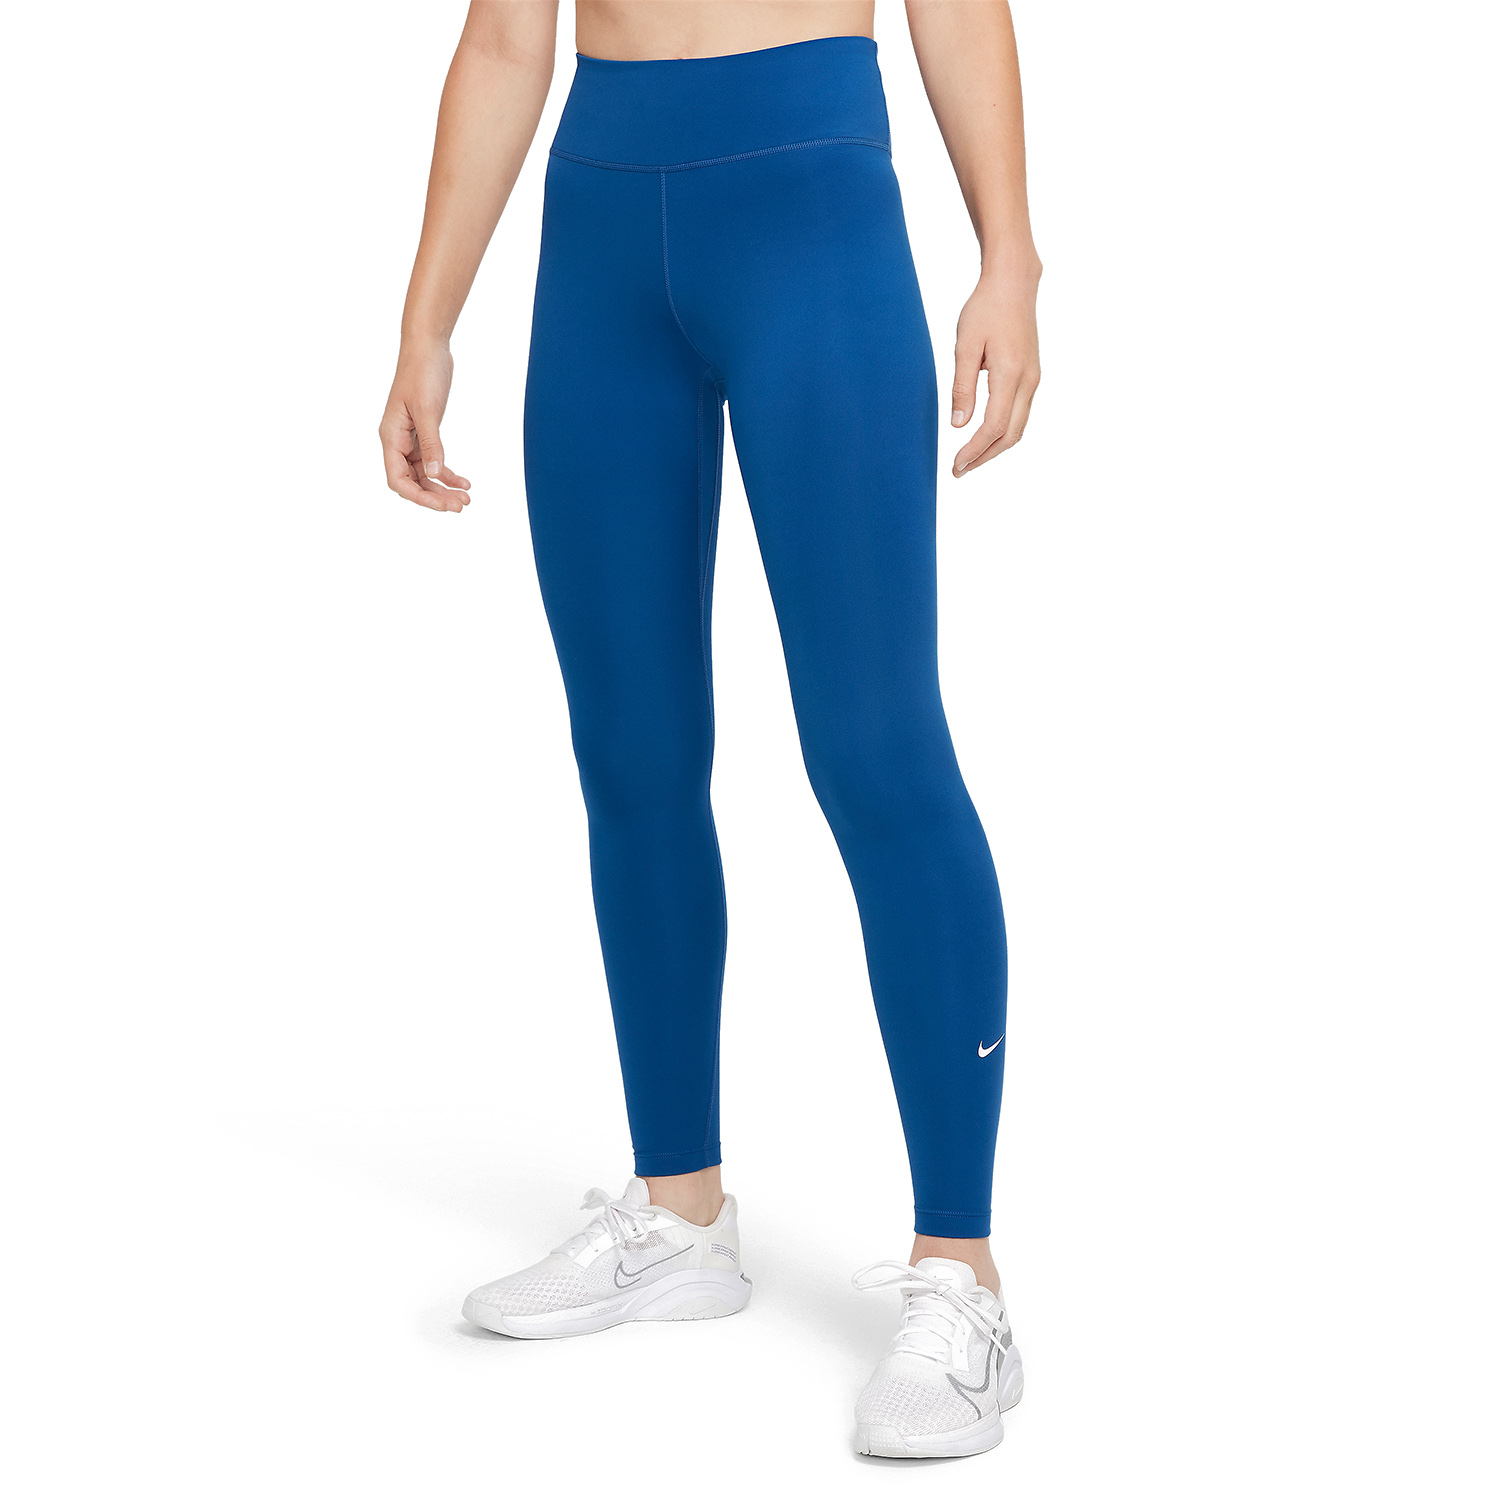 Nike One Women's Training Tights - Court Blue/White